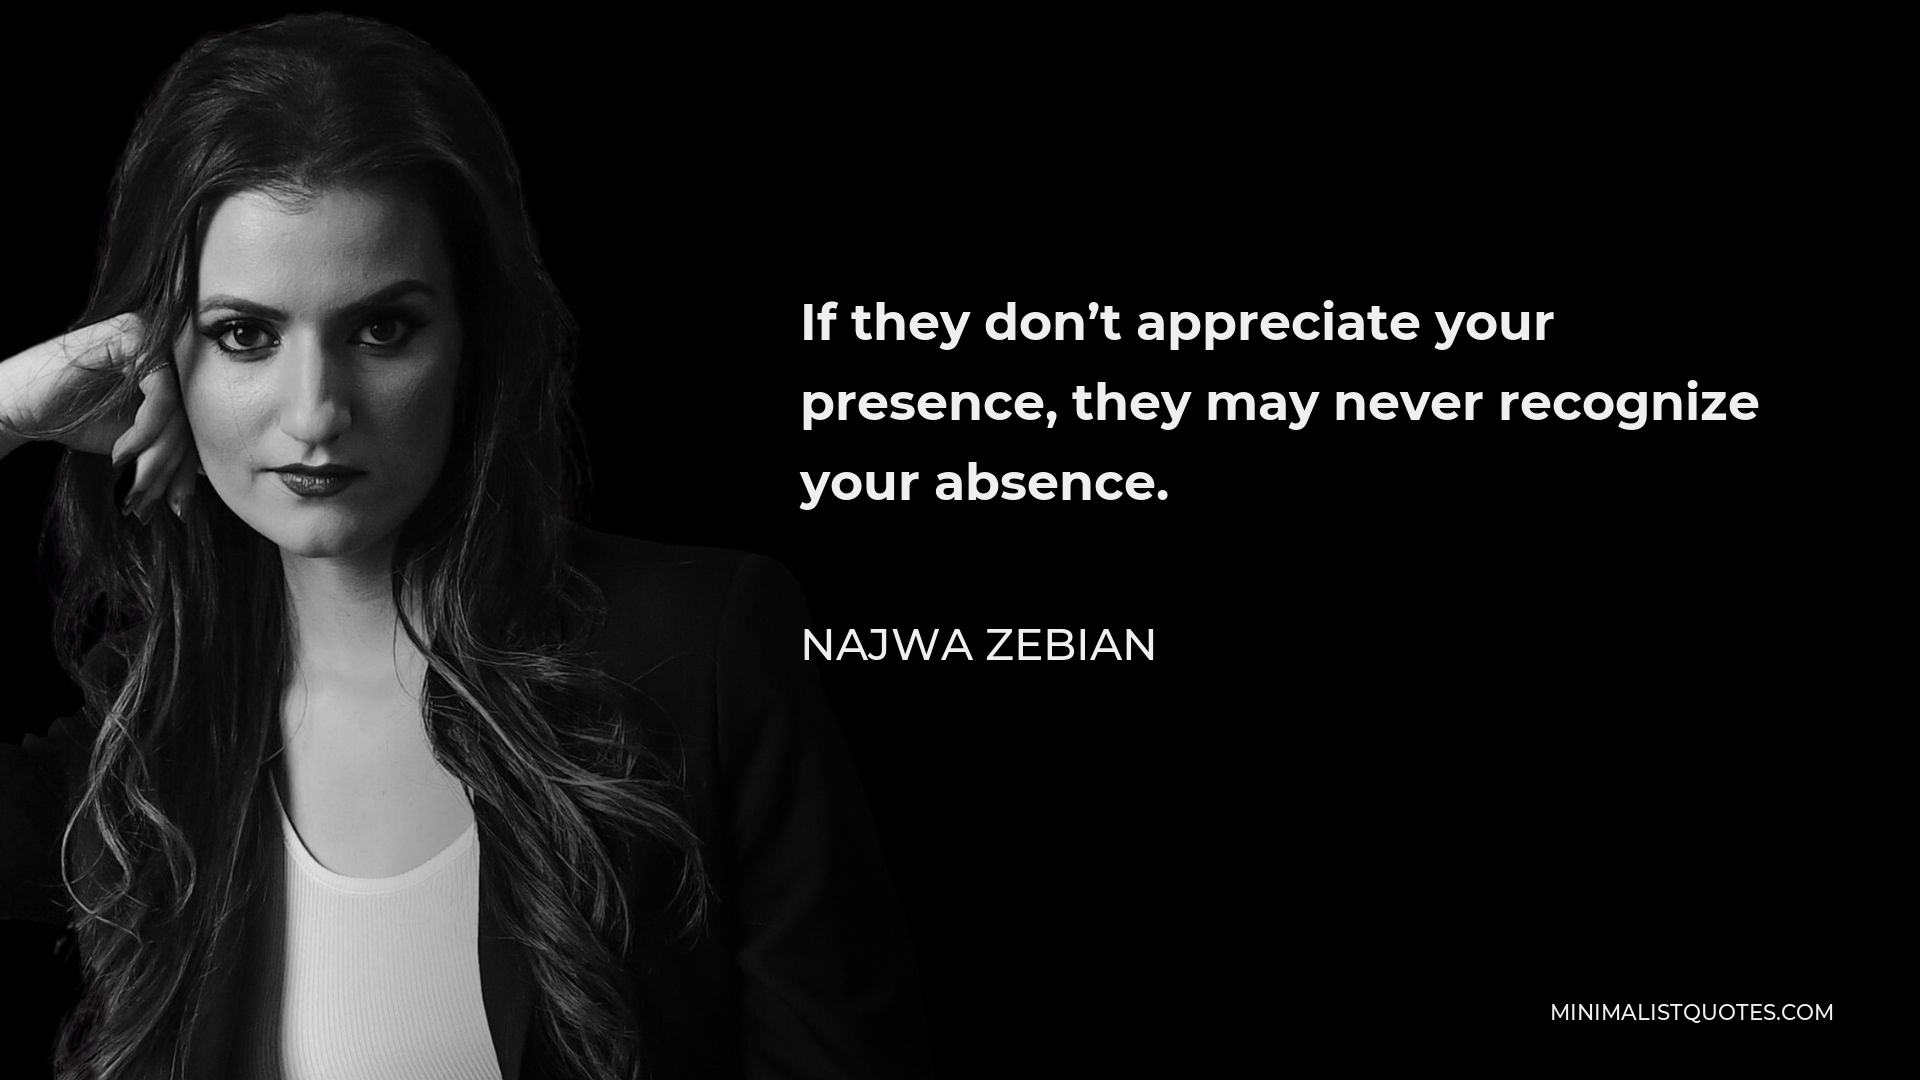 Najwa Zebian Quote - If they don’t appreciate your presence, they may never recognize your absence.